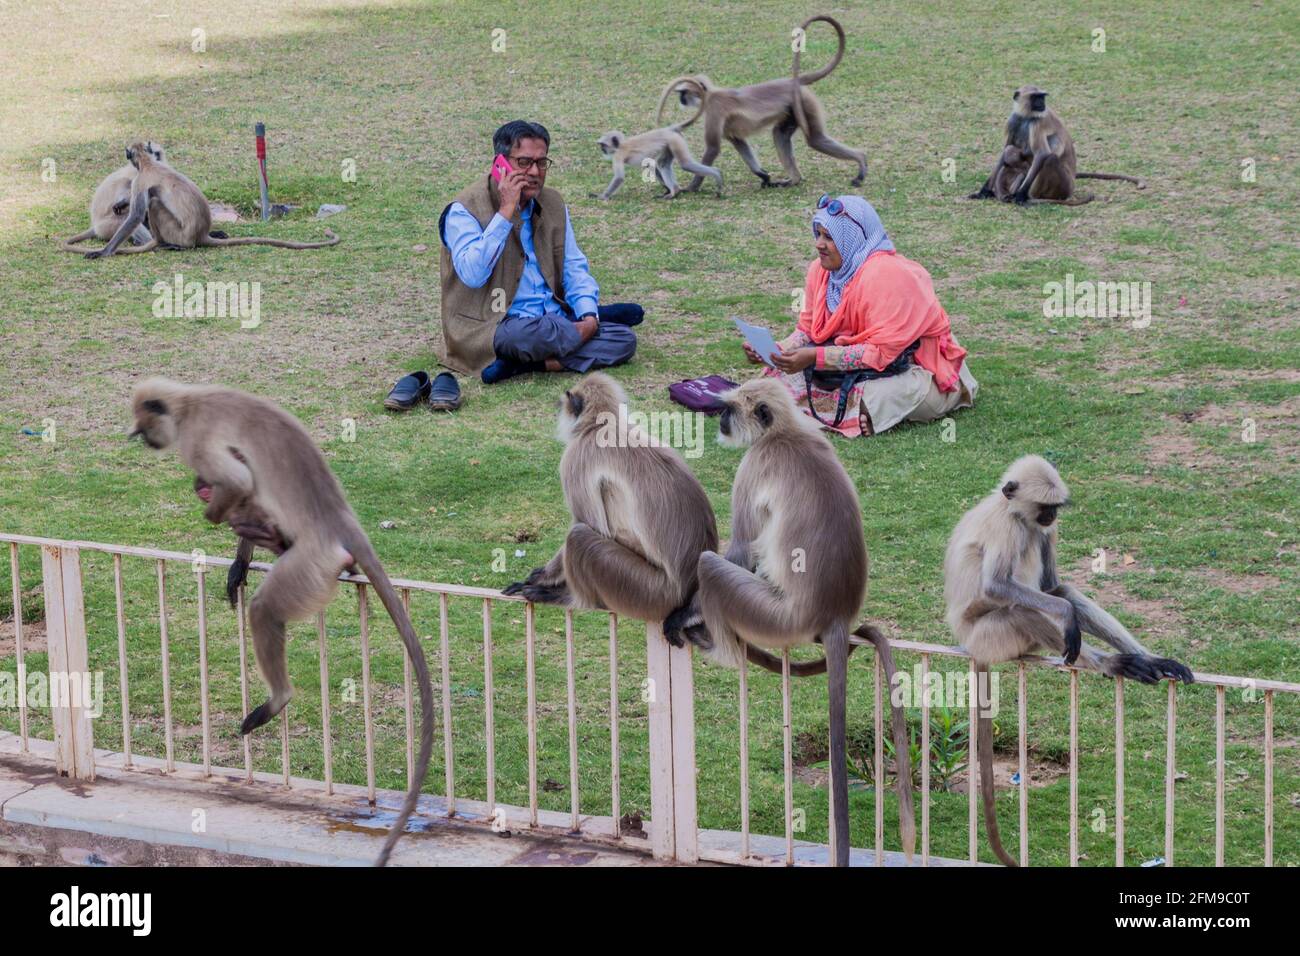 CHITTORGARH, INDIA - FEBRUARY 15, 2017: People sit on a grass among Langur monkeys at Chittor Fort in Chittorgarh, Rajasthan state, India Stock Photo